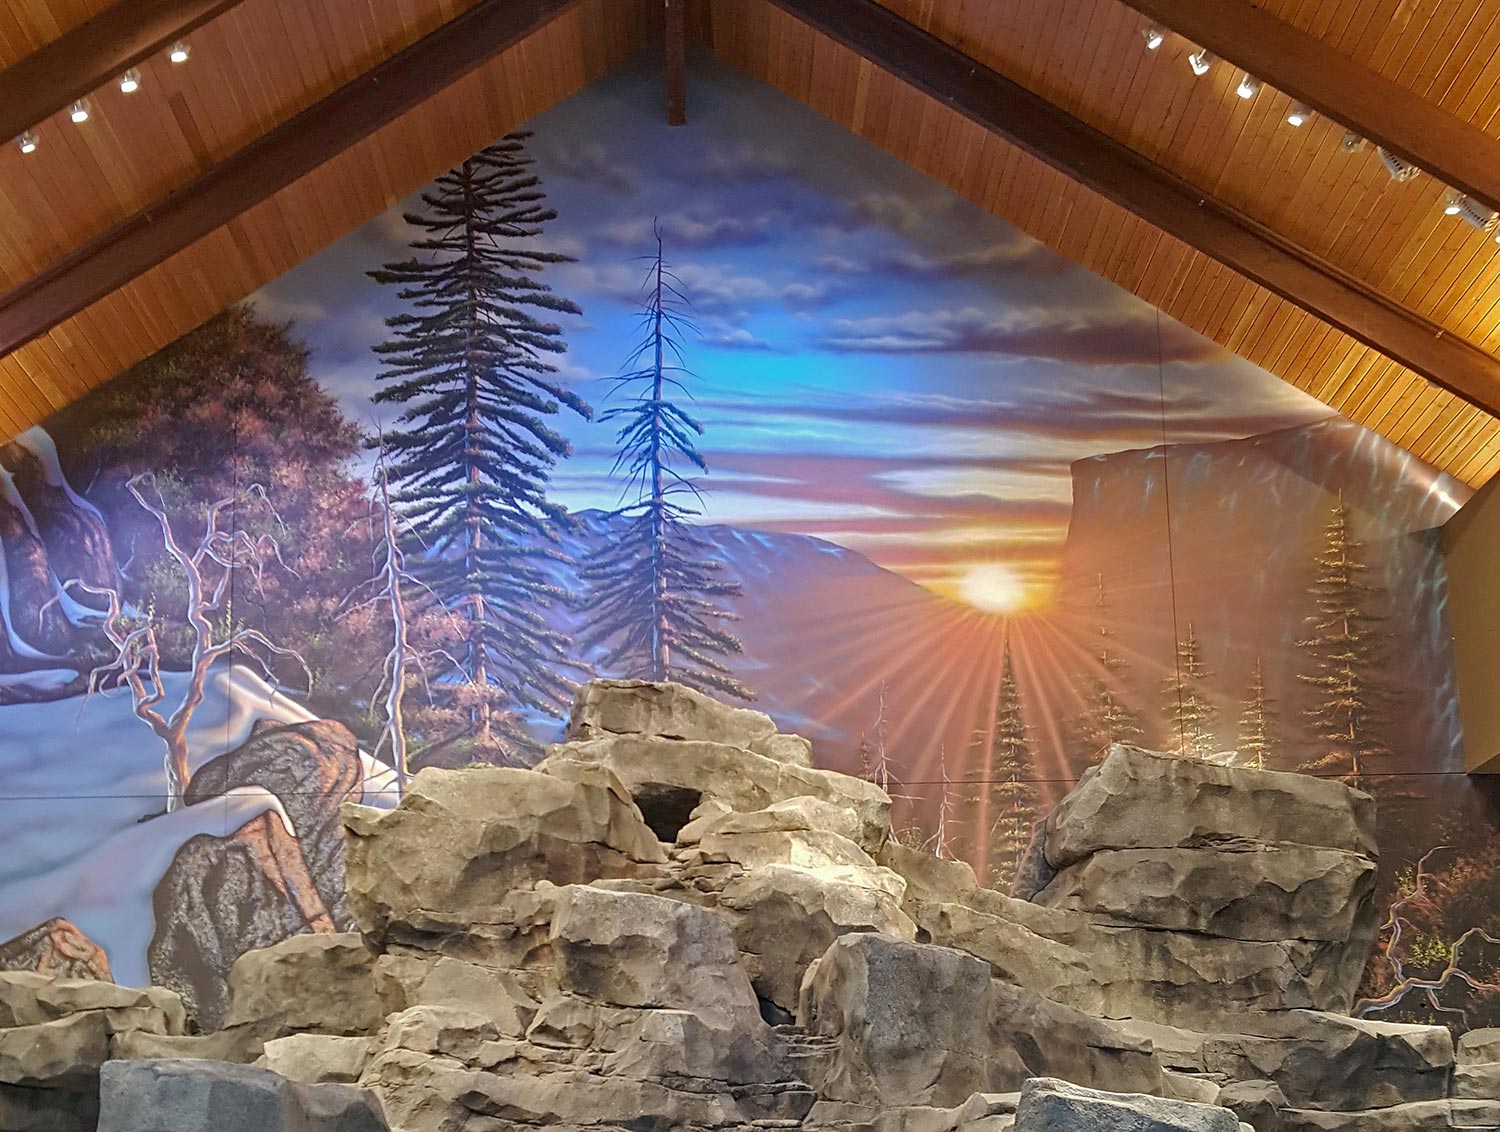 Mural Diorama on location for Corporate Sporting Goods Chain